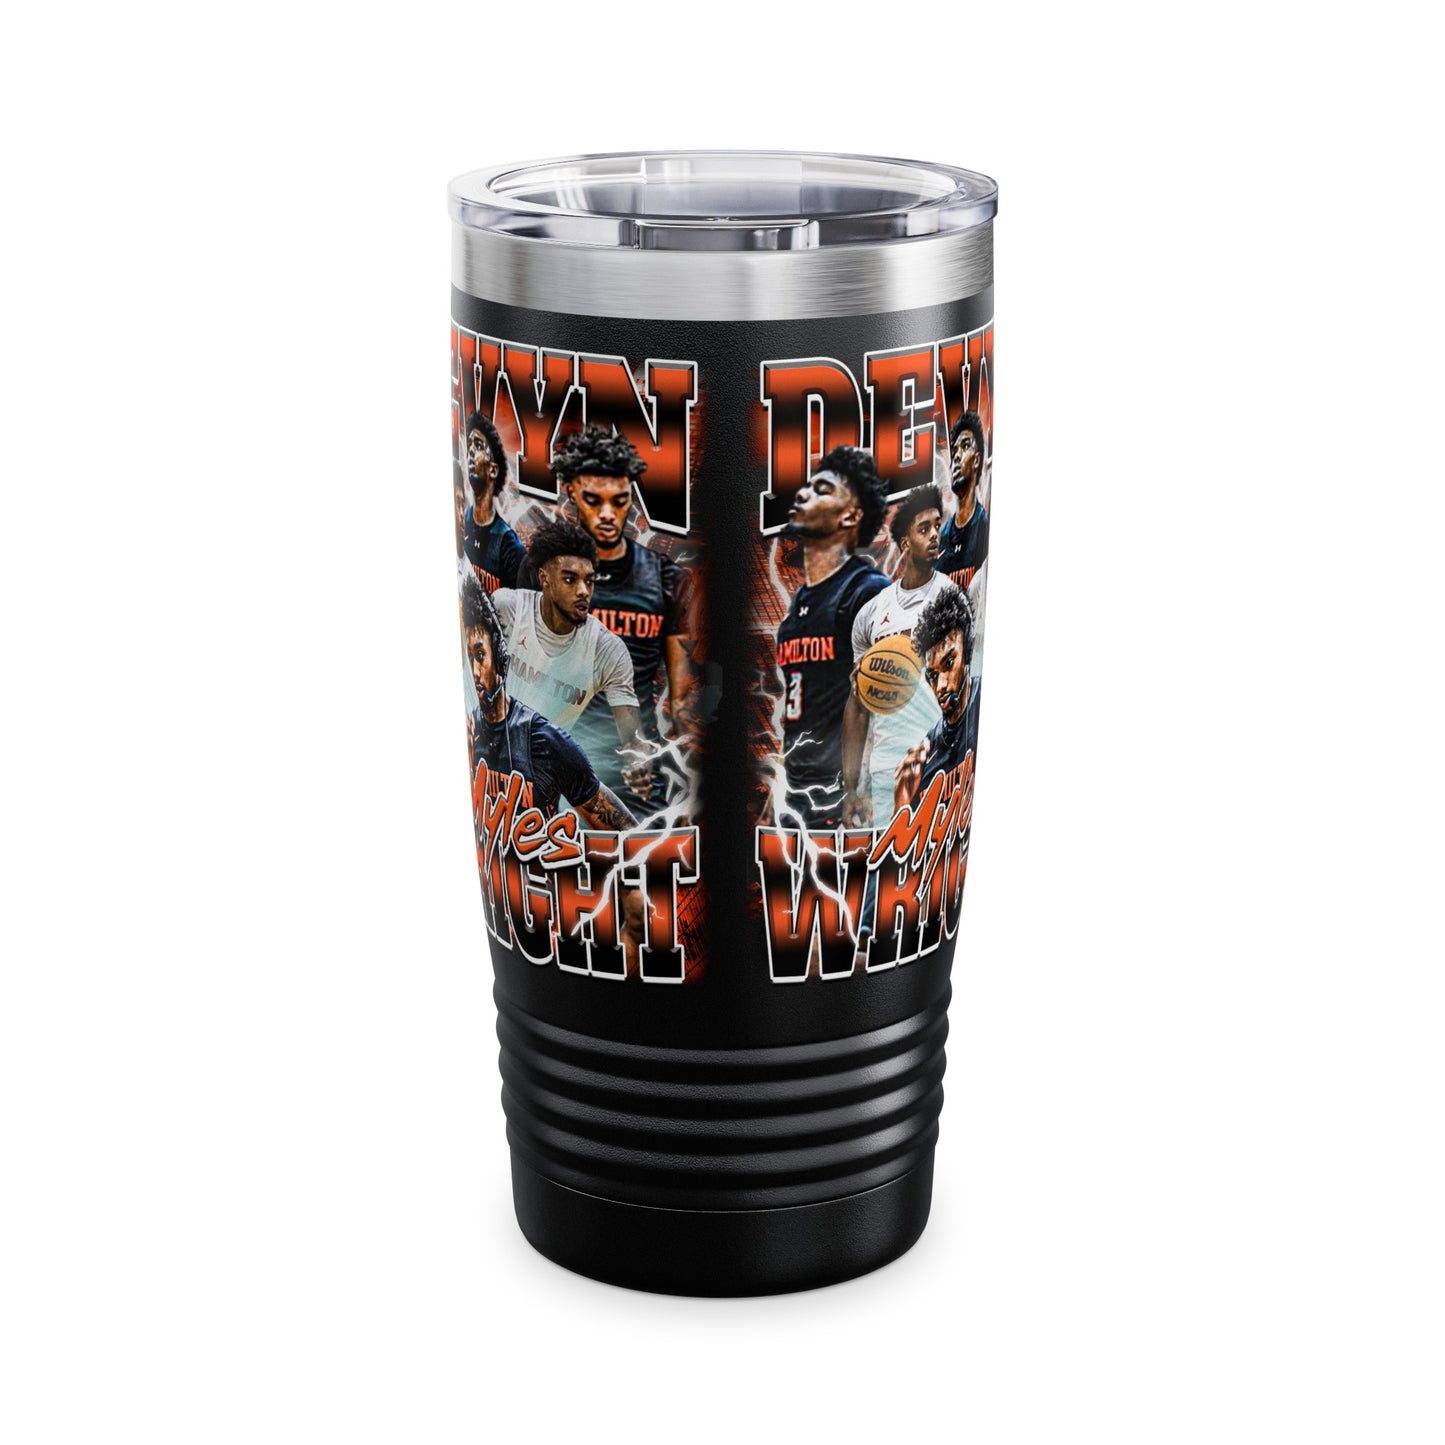 Devyn Wright Stainless Steal Tumbler